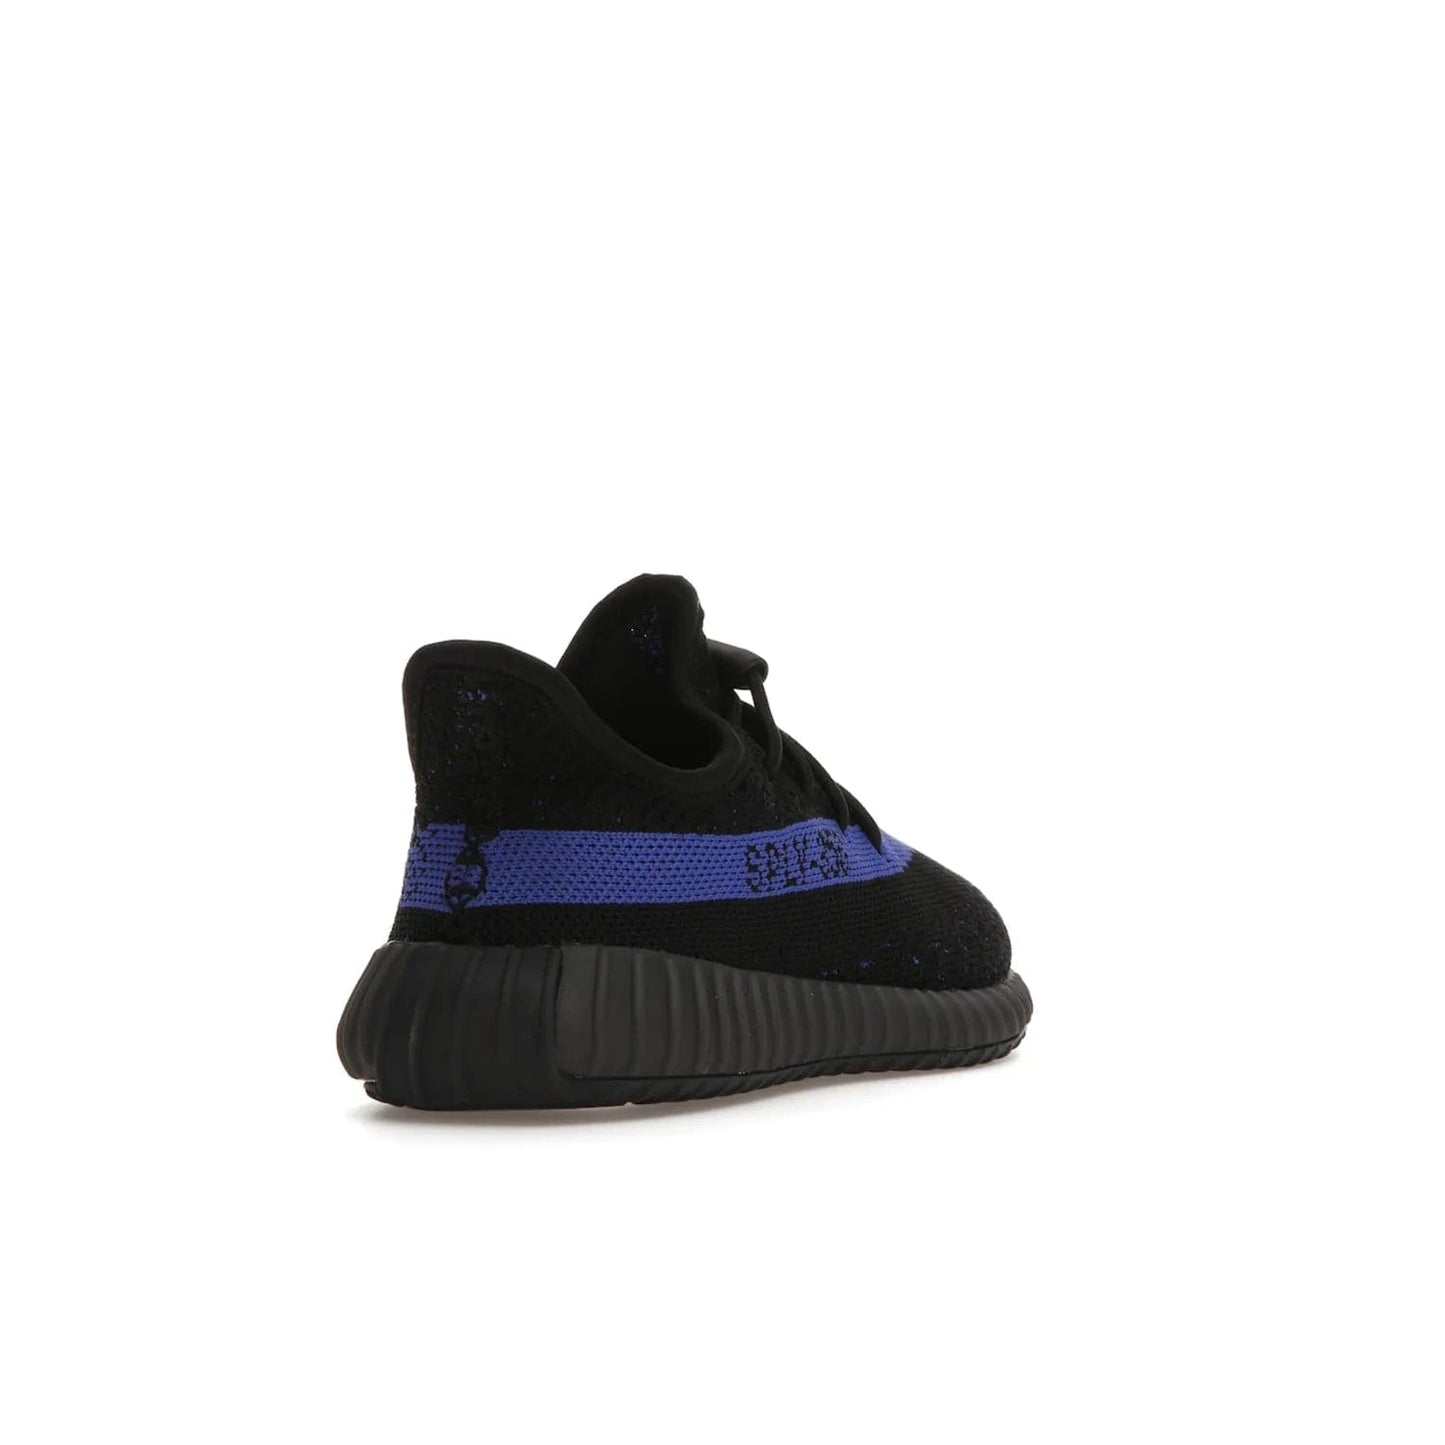 adidas Yeezy Boost 350 V2 Dazzling Blue (Kids) - Image 31 - Only at www.BallersClubKickz.com - Shop the adidas Yeezy Boost 350 V2 Dazzling Blue (Kids). Features a black Primeknit upper with a royal blue 'SPLY-350' streak and a full-length Boost midsole. Durable rubber outsole provides plenty of traction. Available for $160.